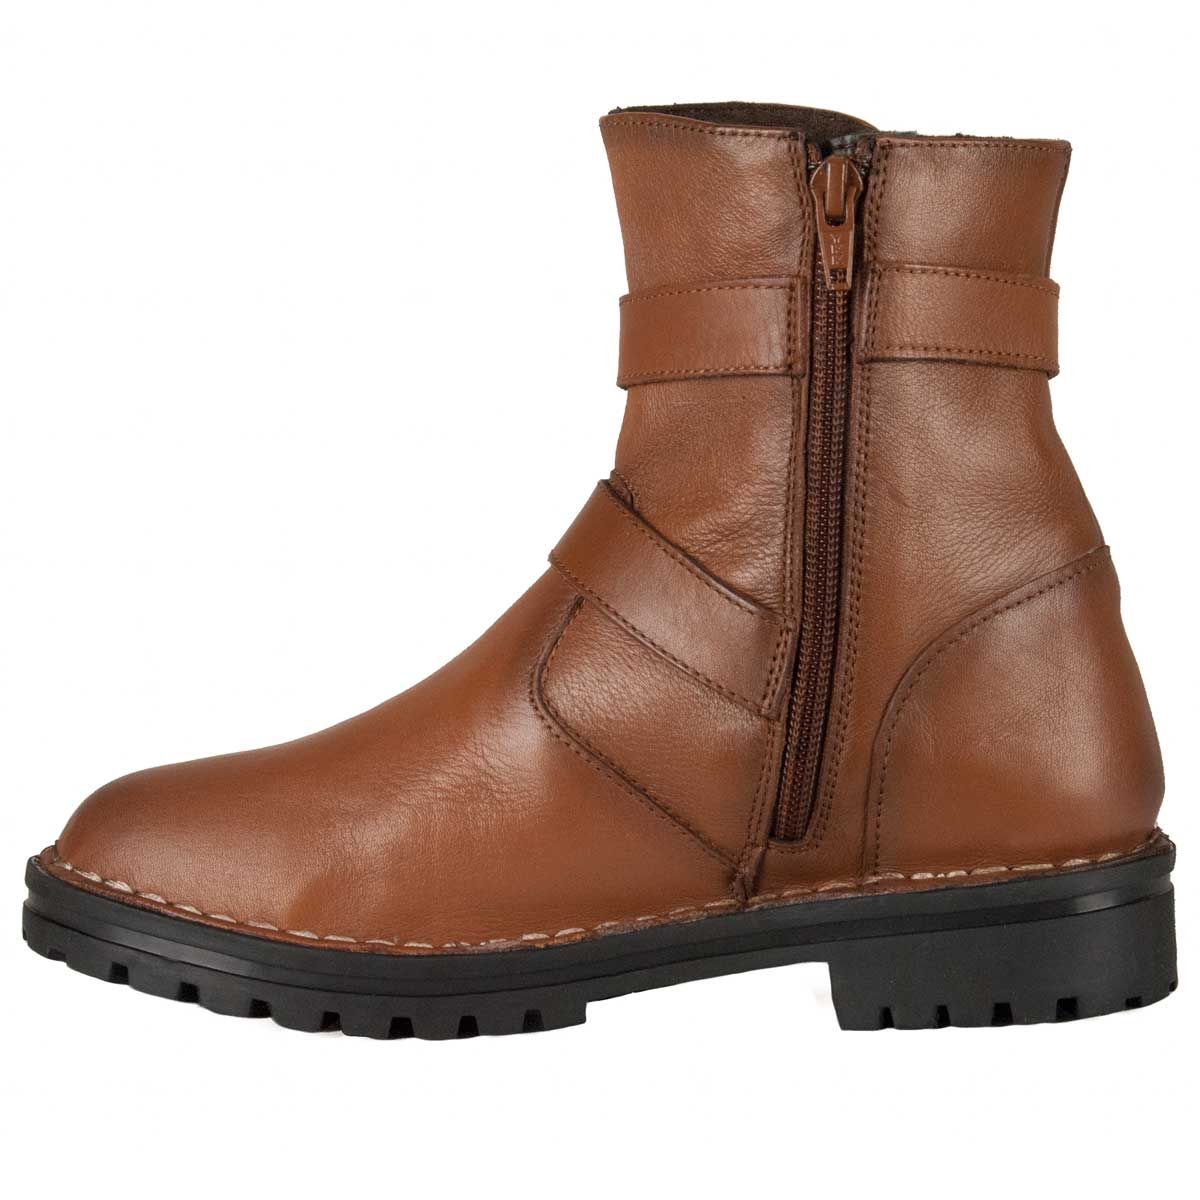 Ideal bike style boot with buckles. Manufactured in very soft natural skin and comfortable. Anti-slip rubber floor. Interior zipper. Previous and later buttress. Capsule collection by Wikers.